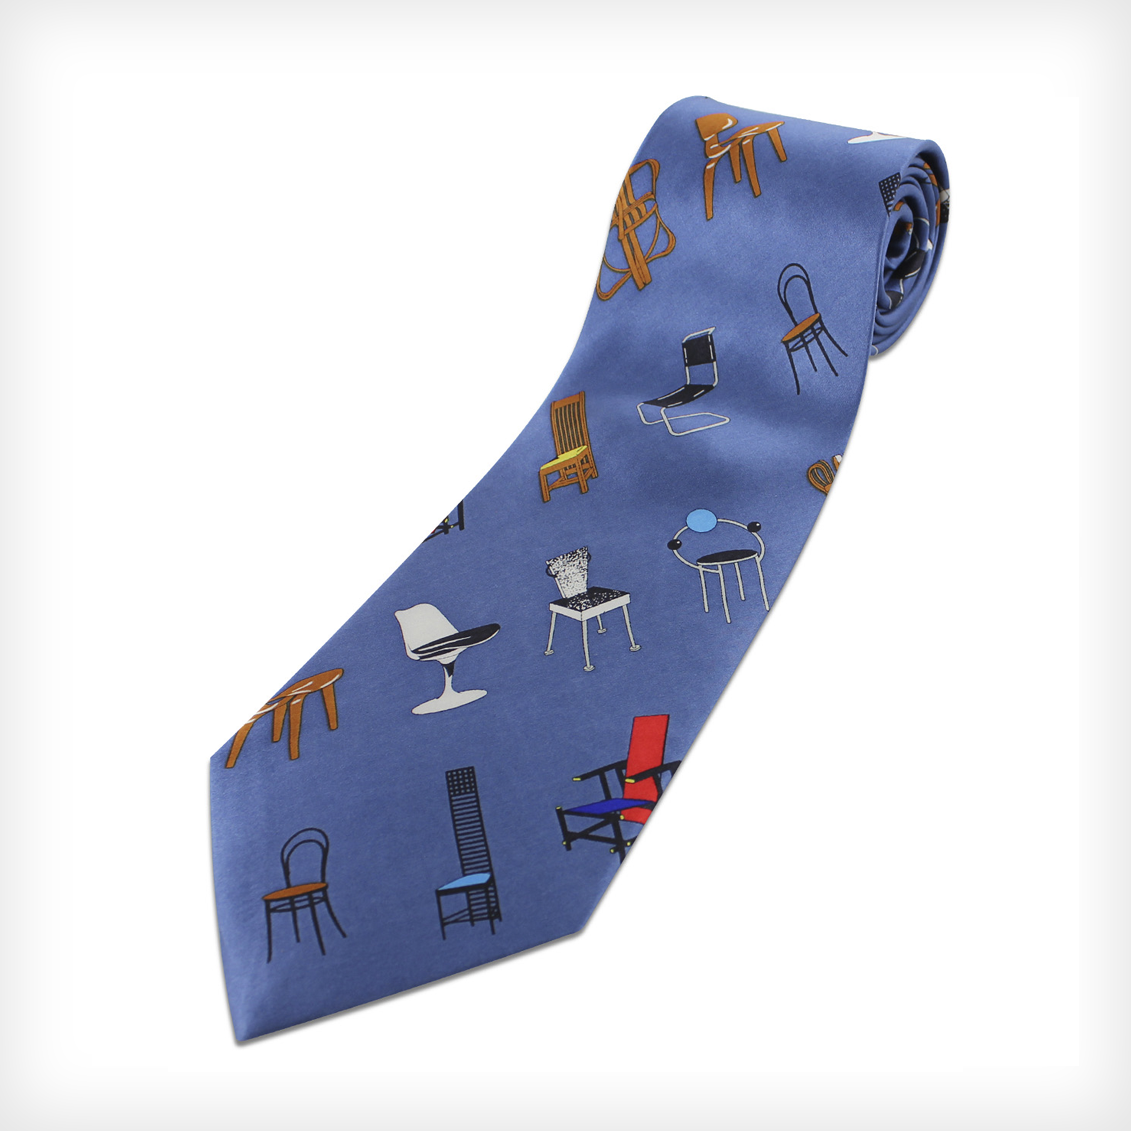 "Chairs" Tie